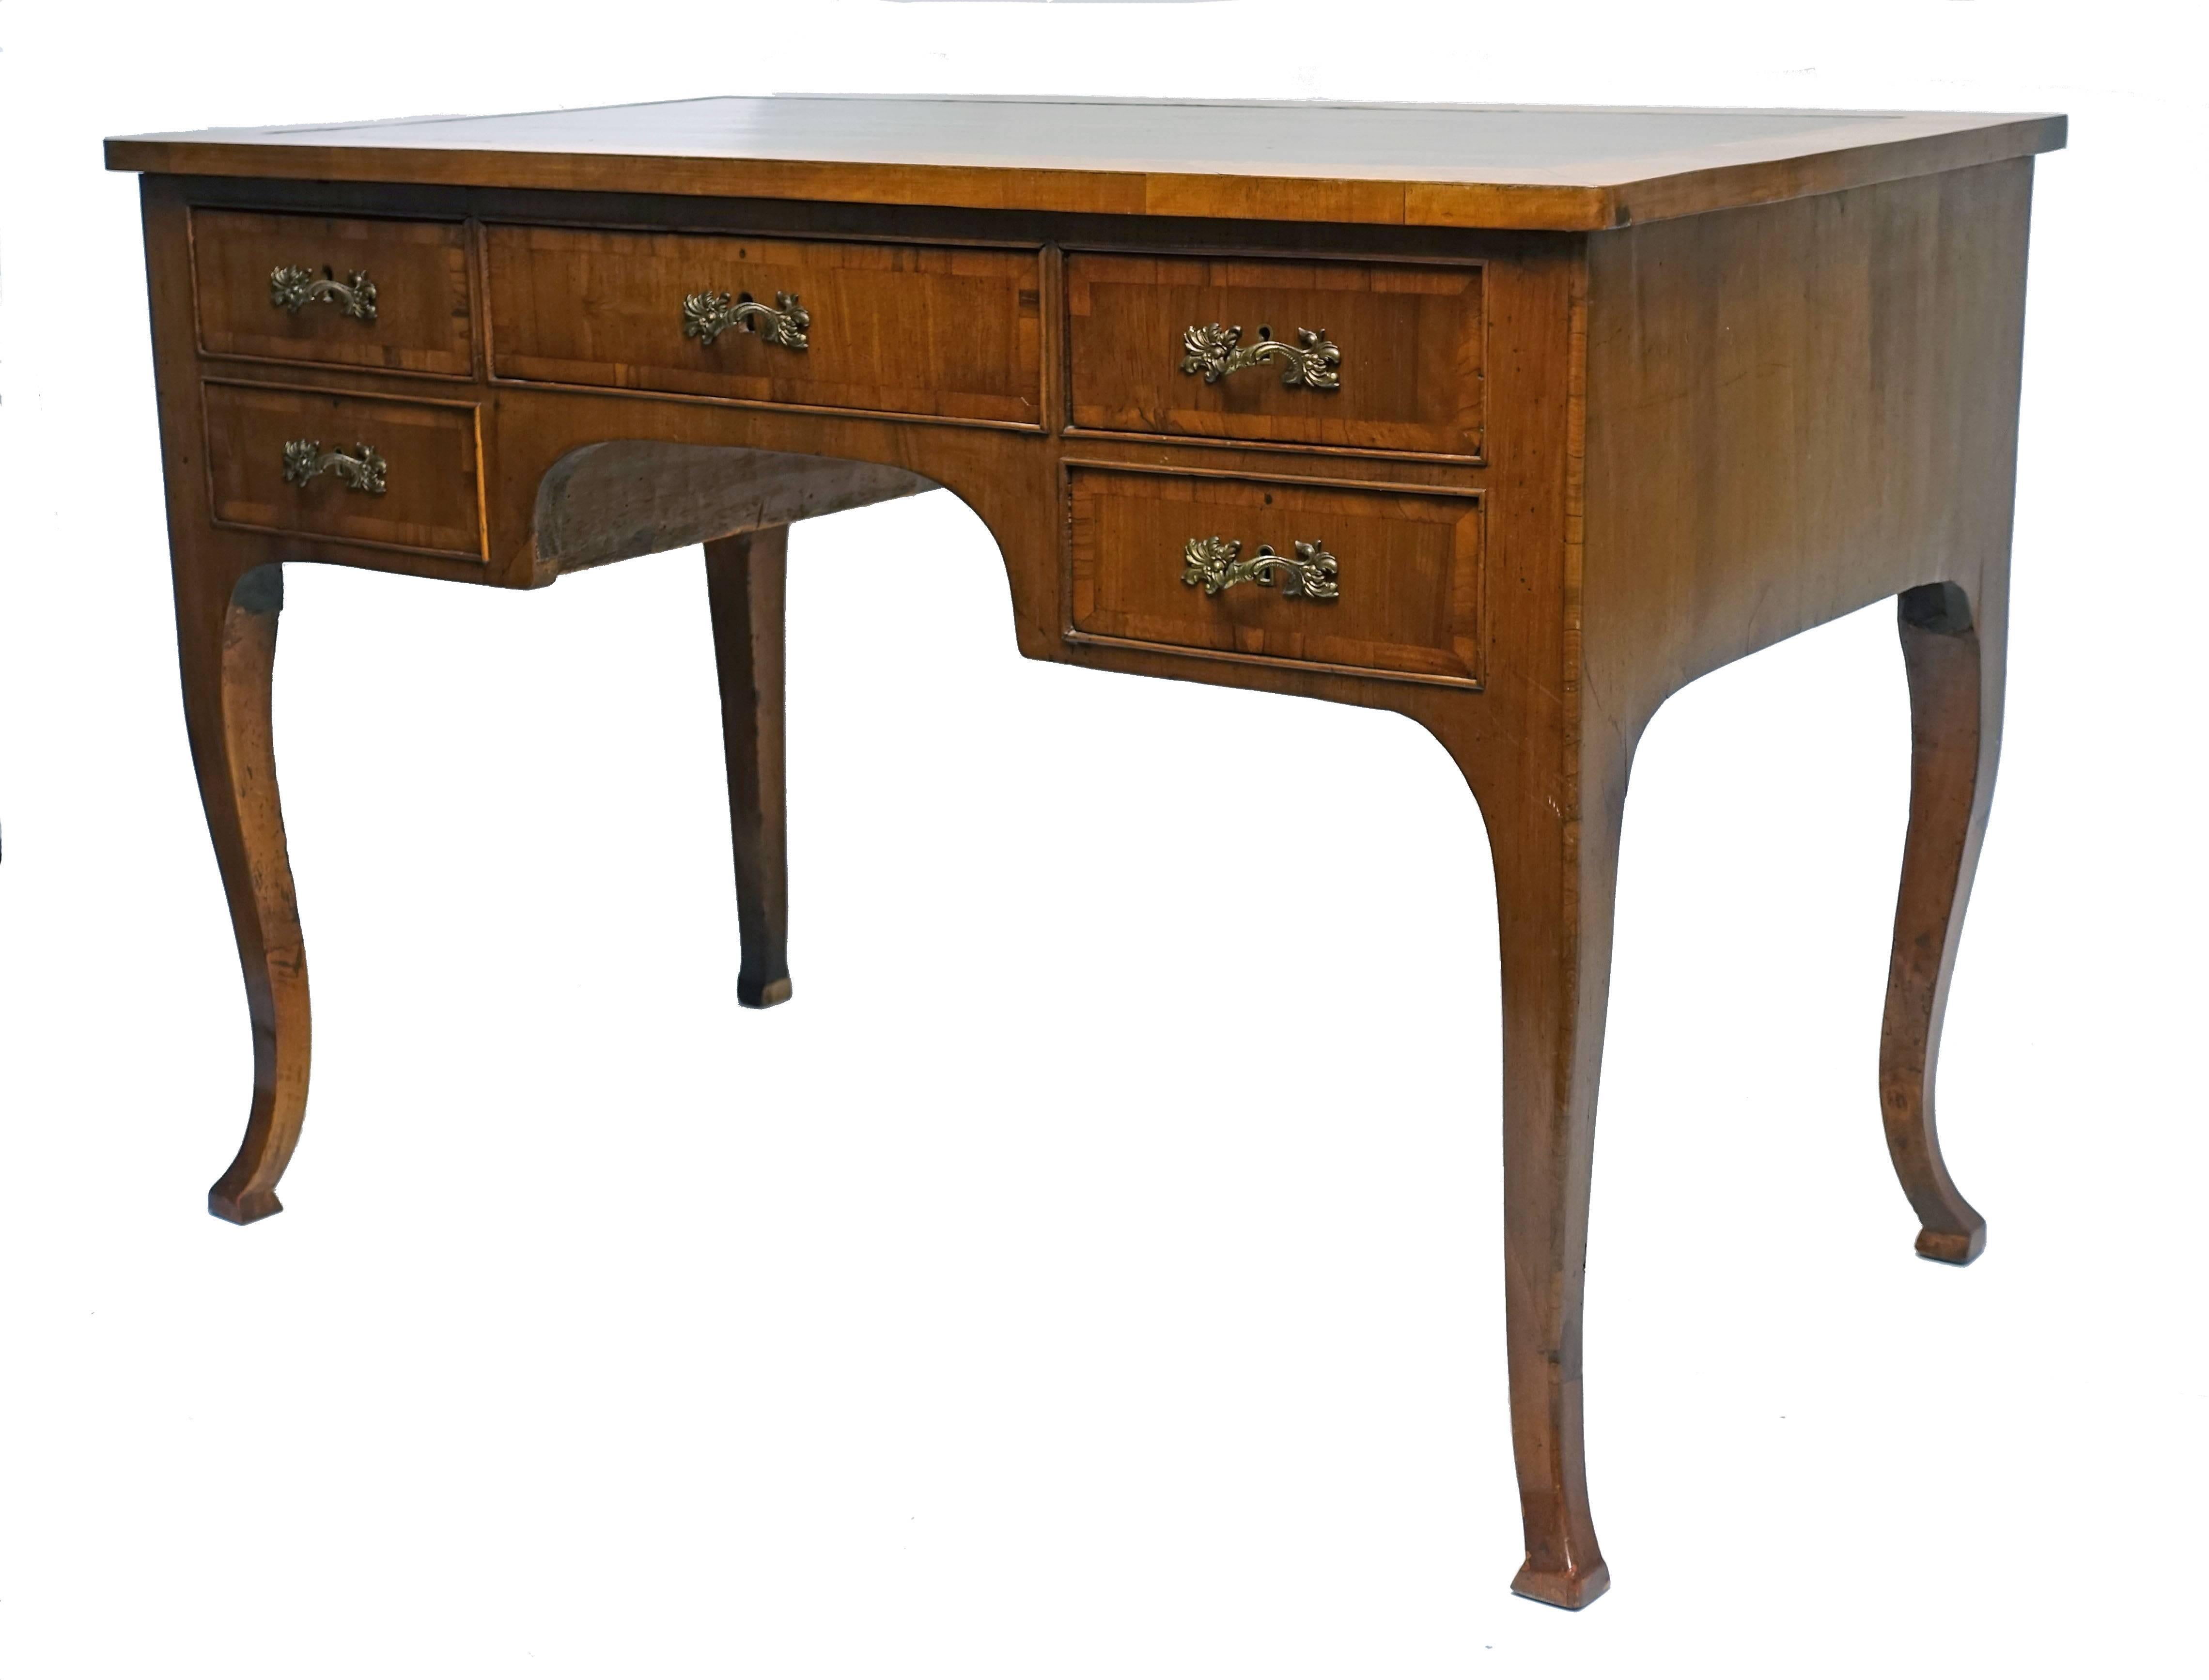 Neoclassical walnut desk with satinwood banding around the green leather writing surface and around each of the drawers, standing on cabriole legs with square foot pads. Italy, mid-19th century, circa 1860.